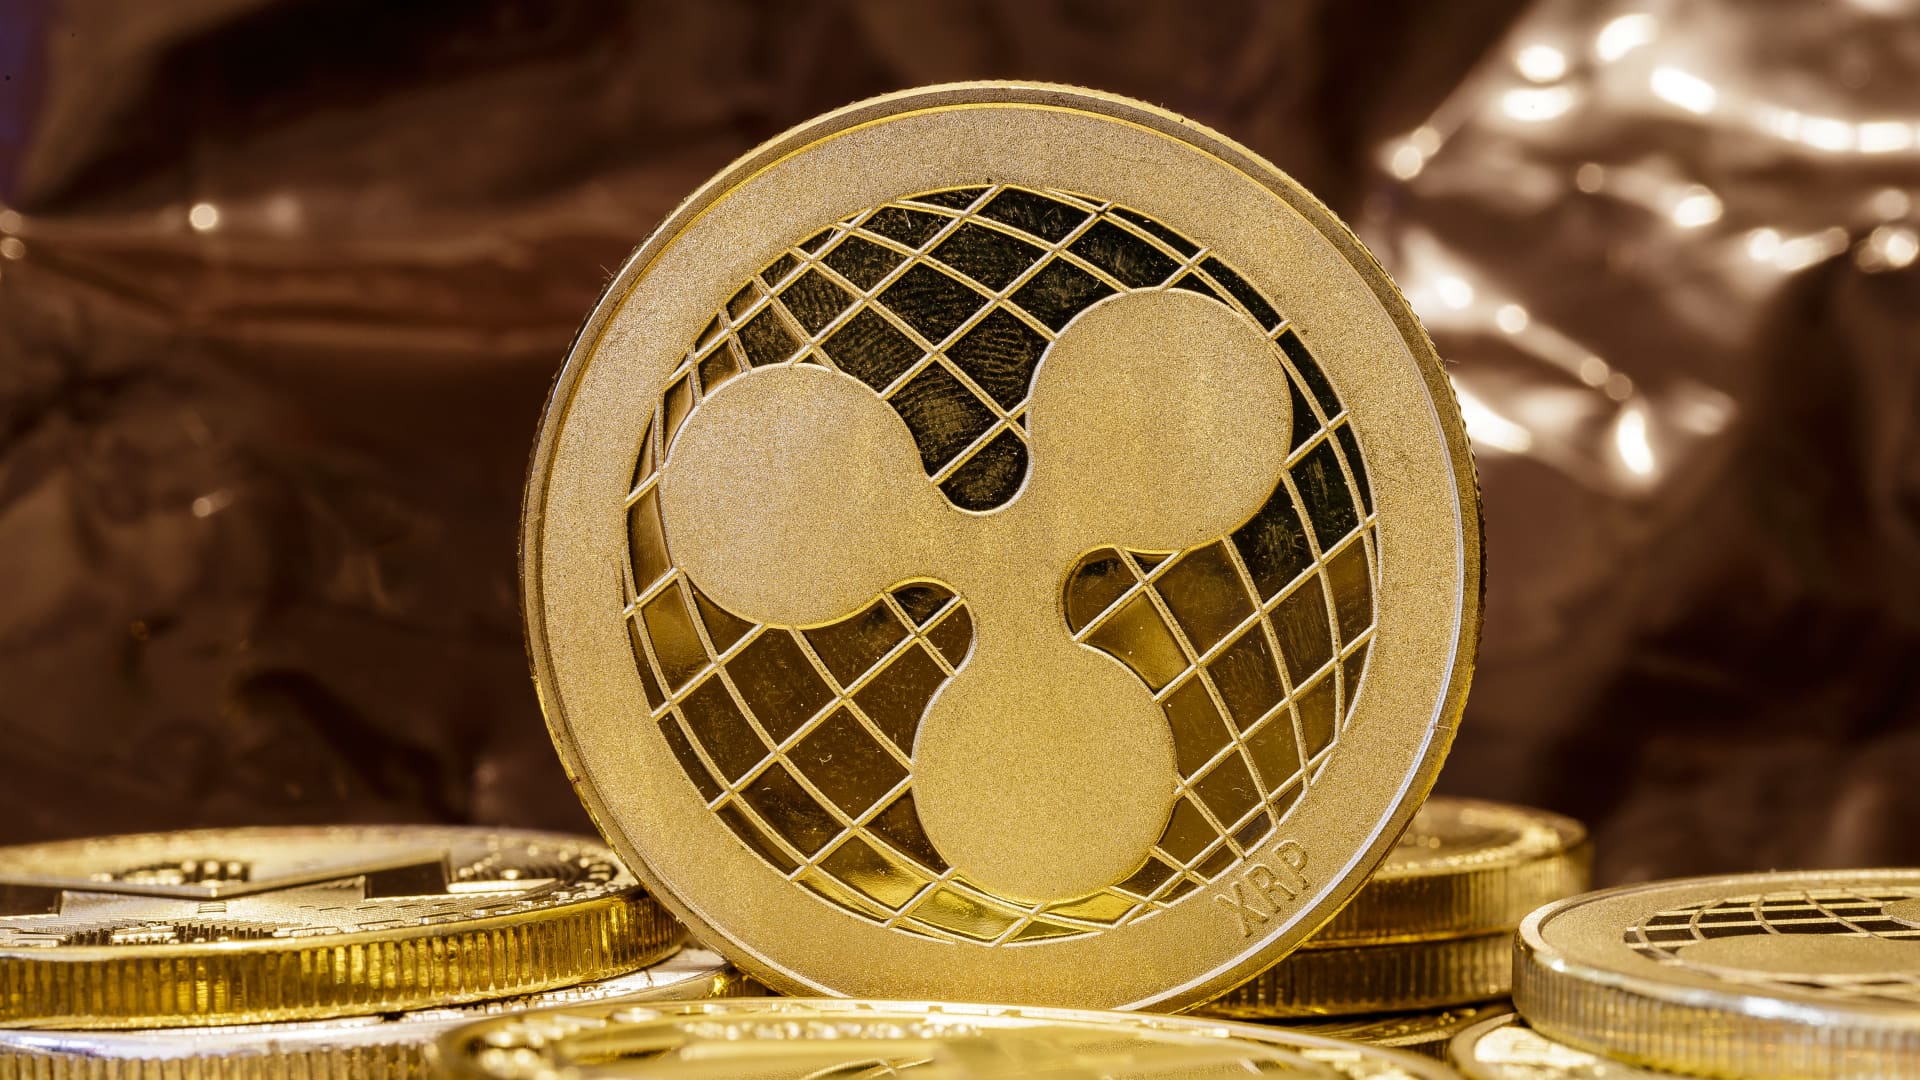 XRP cryptocurrency jumps as investors hope Ripple will win legal battle with the SEC